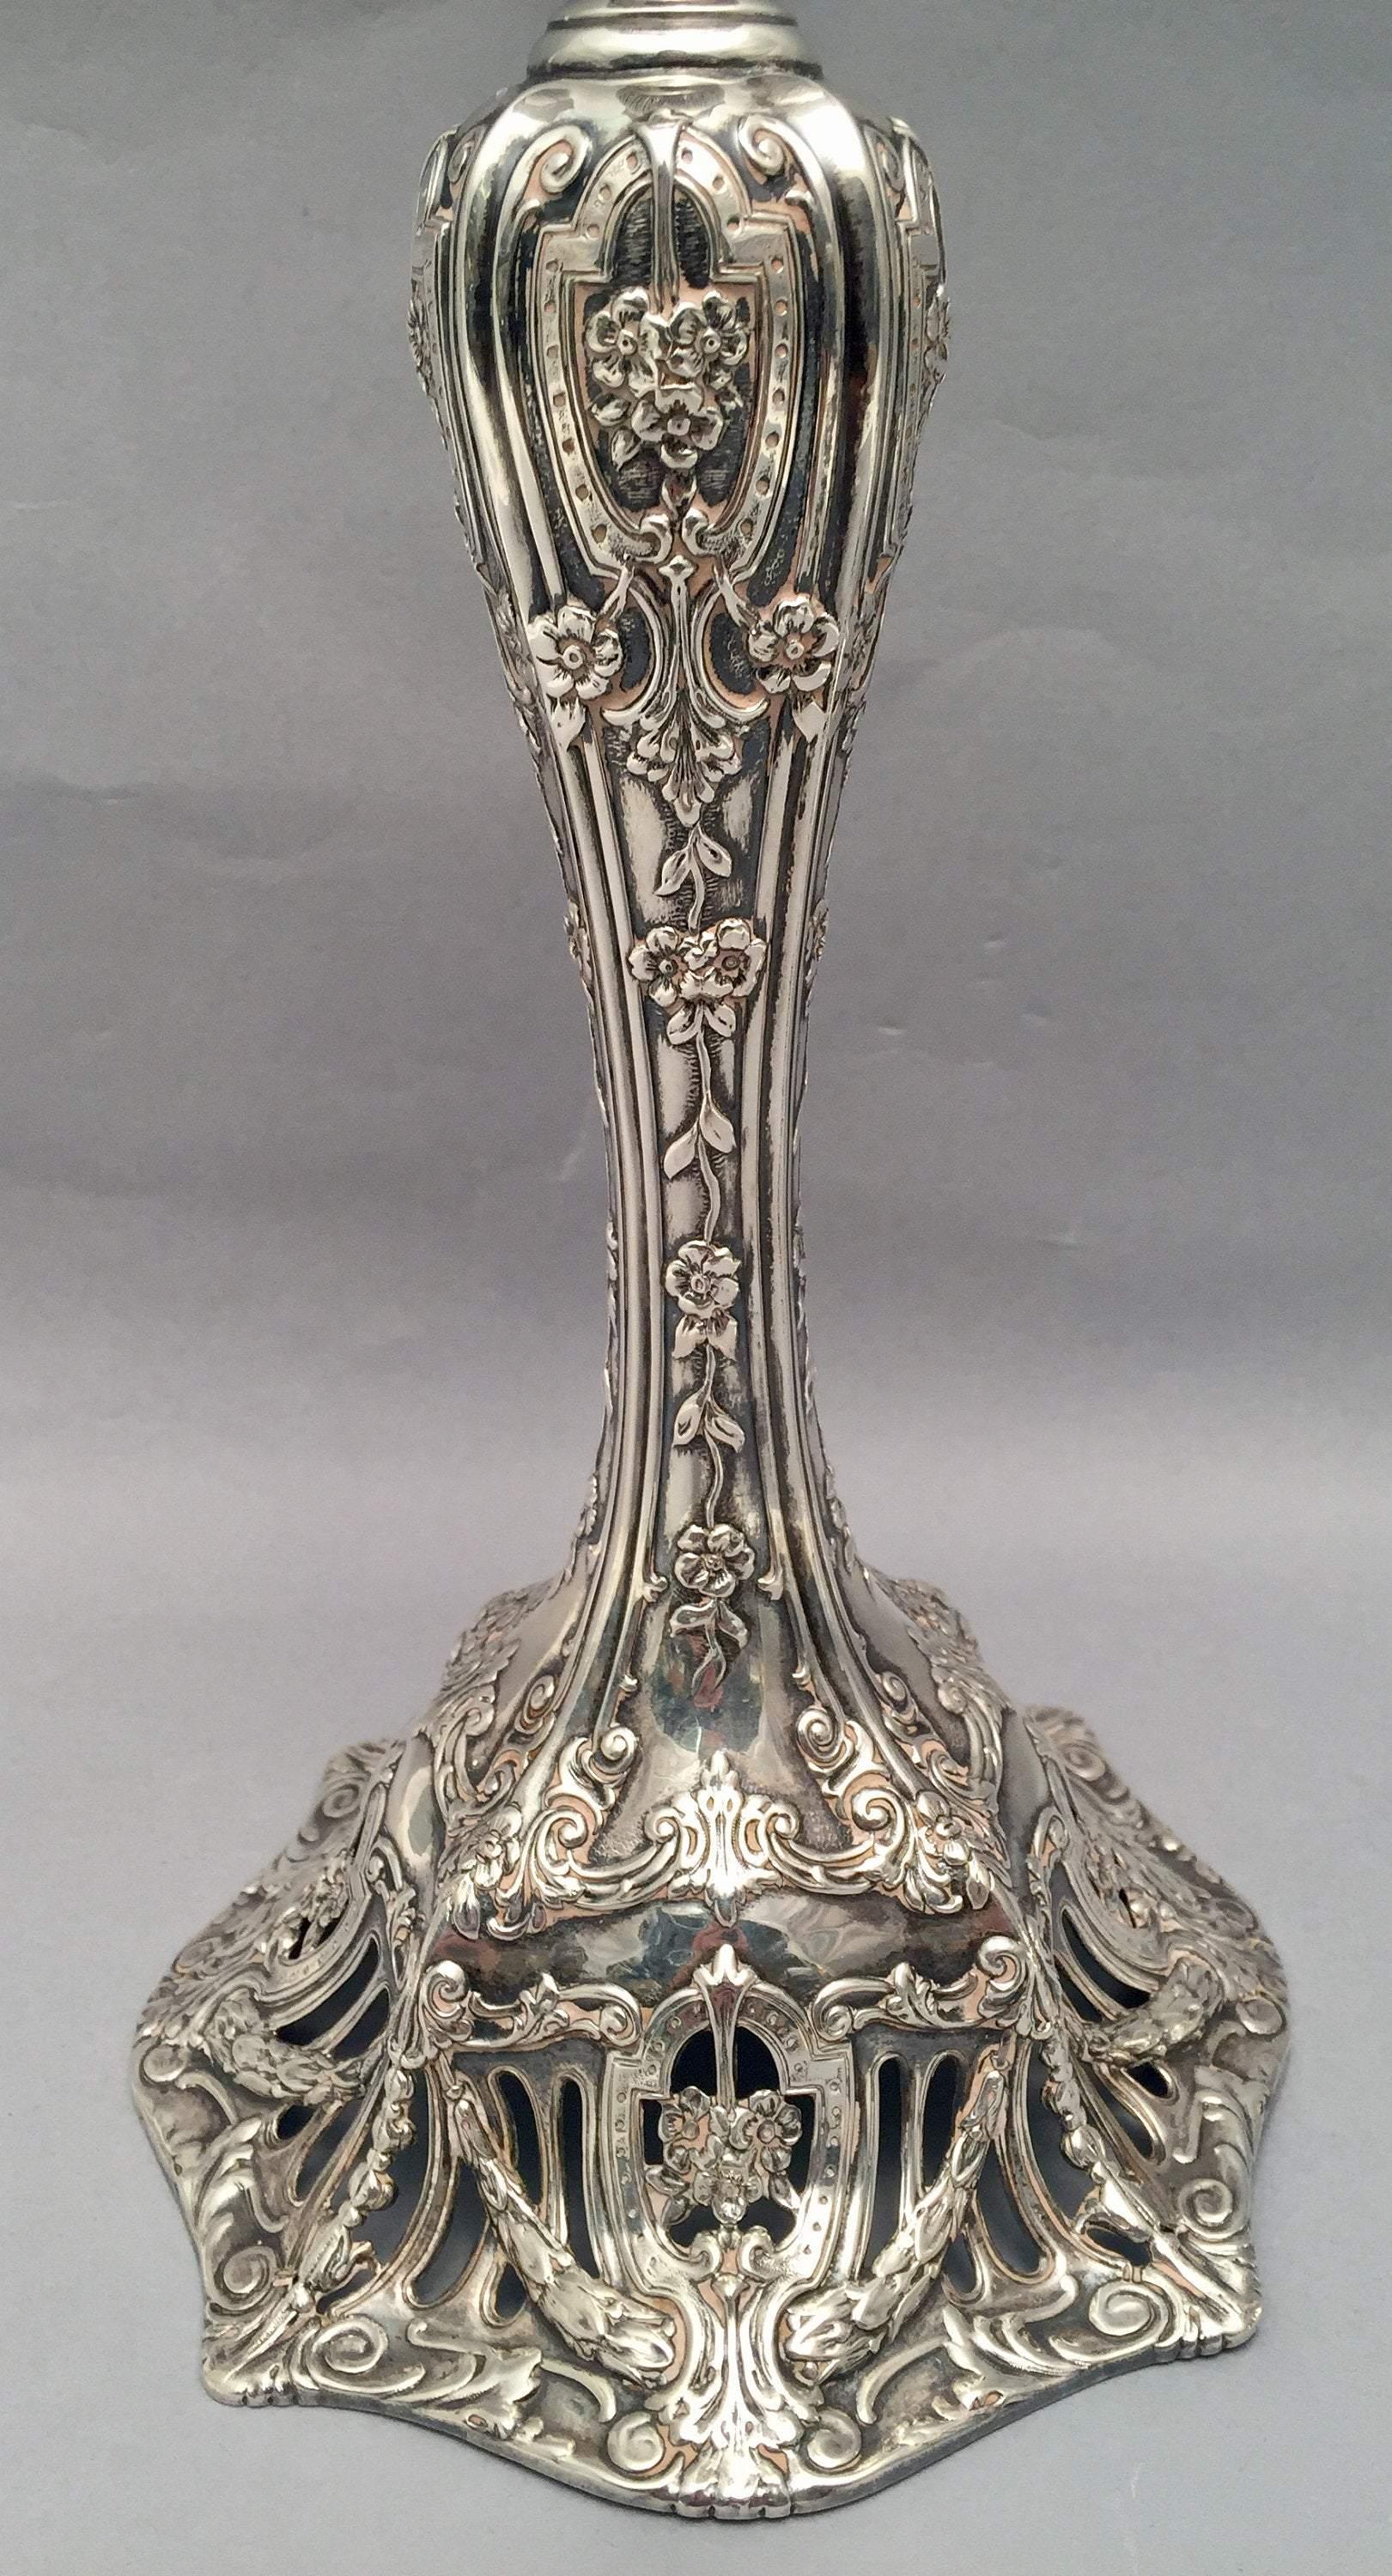 Pair of 20th century American weighted sterling silver candlesticks by Theodore B. Starr, ,having a baluster column with urn form capital, and profusely decorated with tooled and applied swags, flowers, foliage and shields on an openwork base.